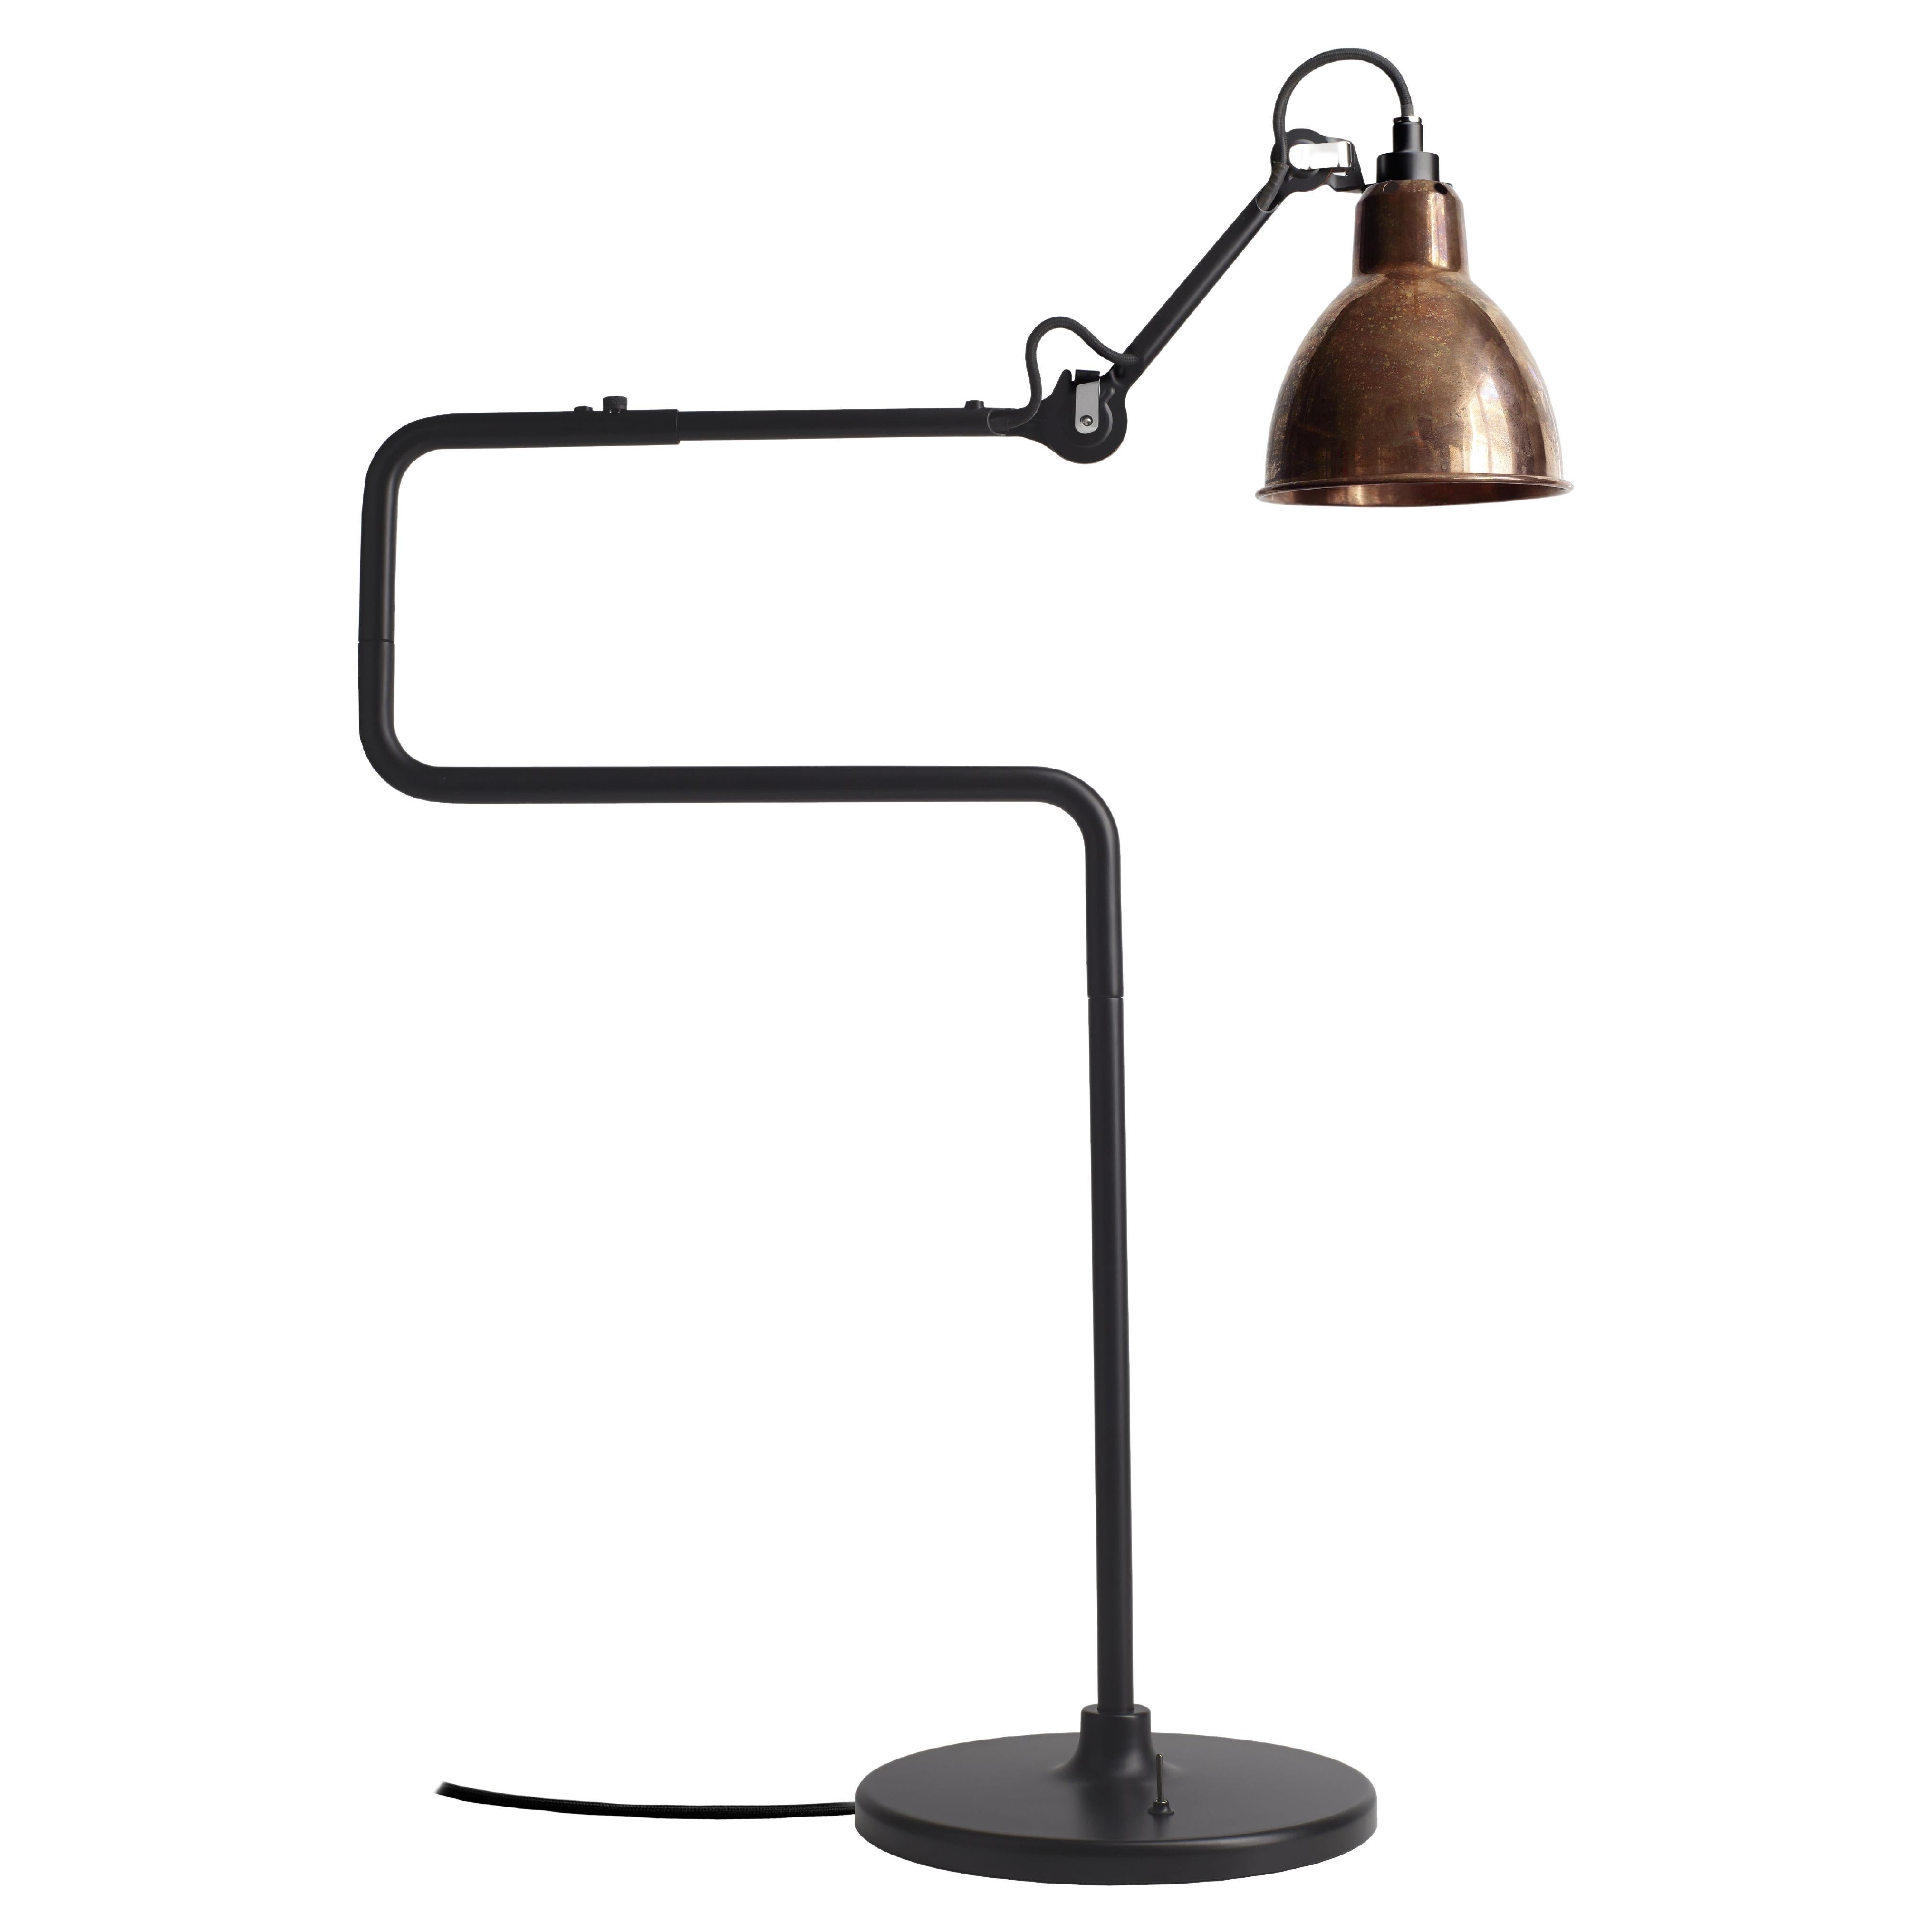 DCW Editions La Lampe Gras N°317 Table Lamp in Black Arm with Raw Copper Shade For Sale